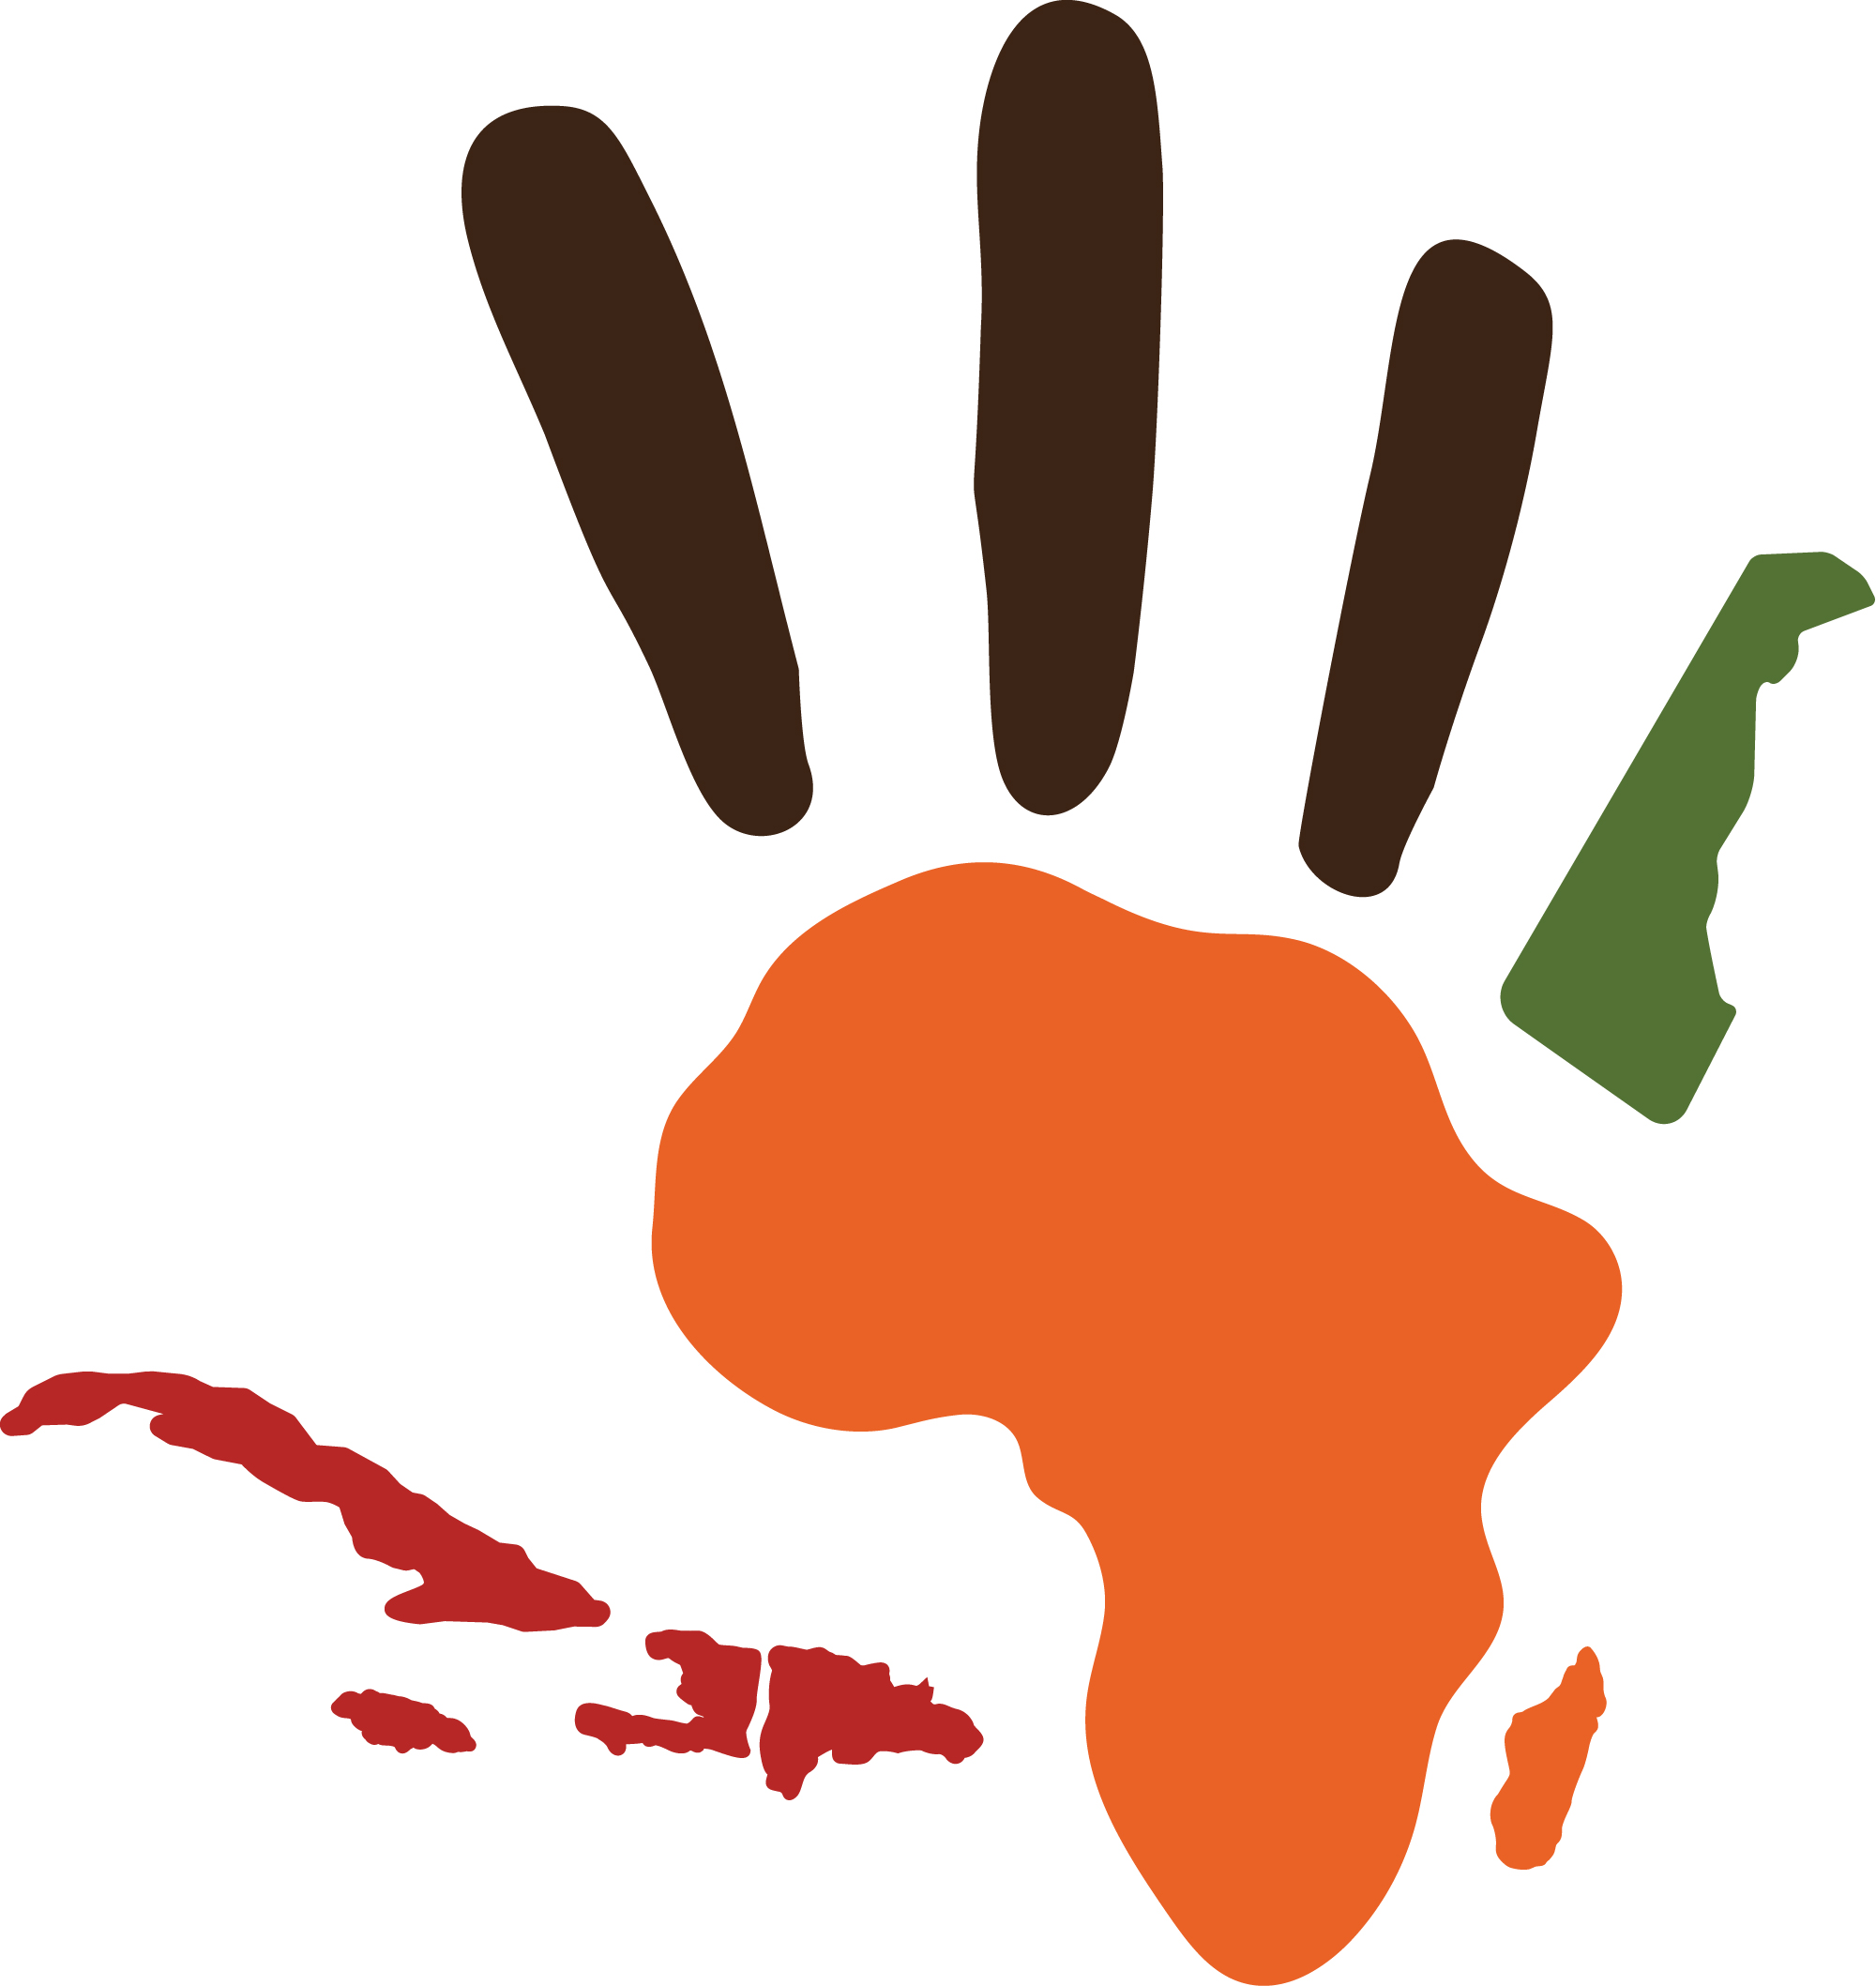 Logo of the Delaware African and Caribbean Affairs Commission